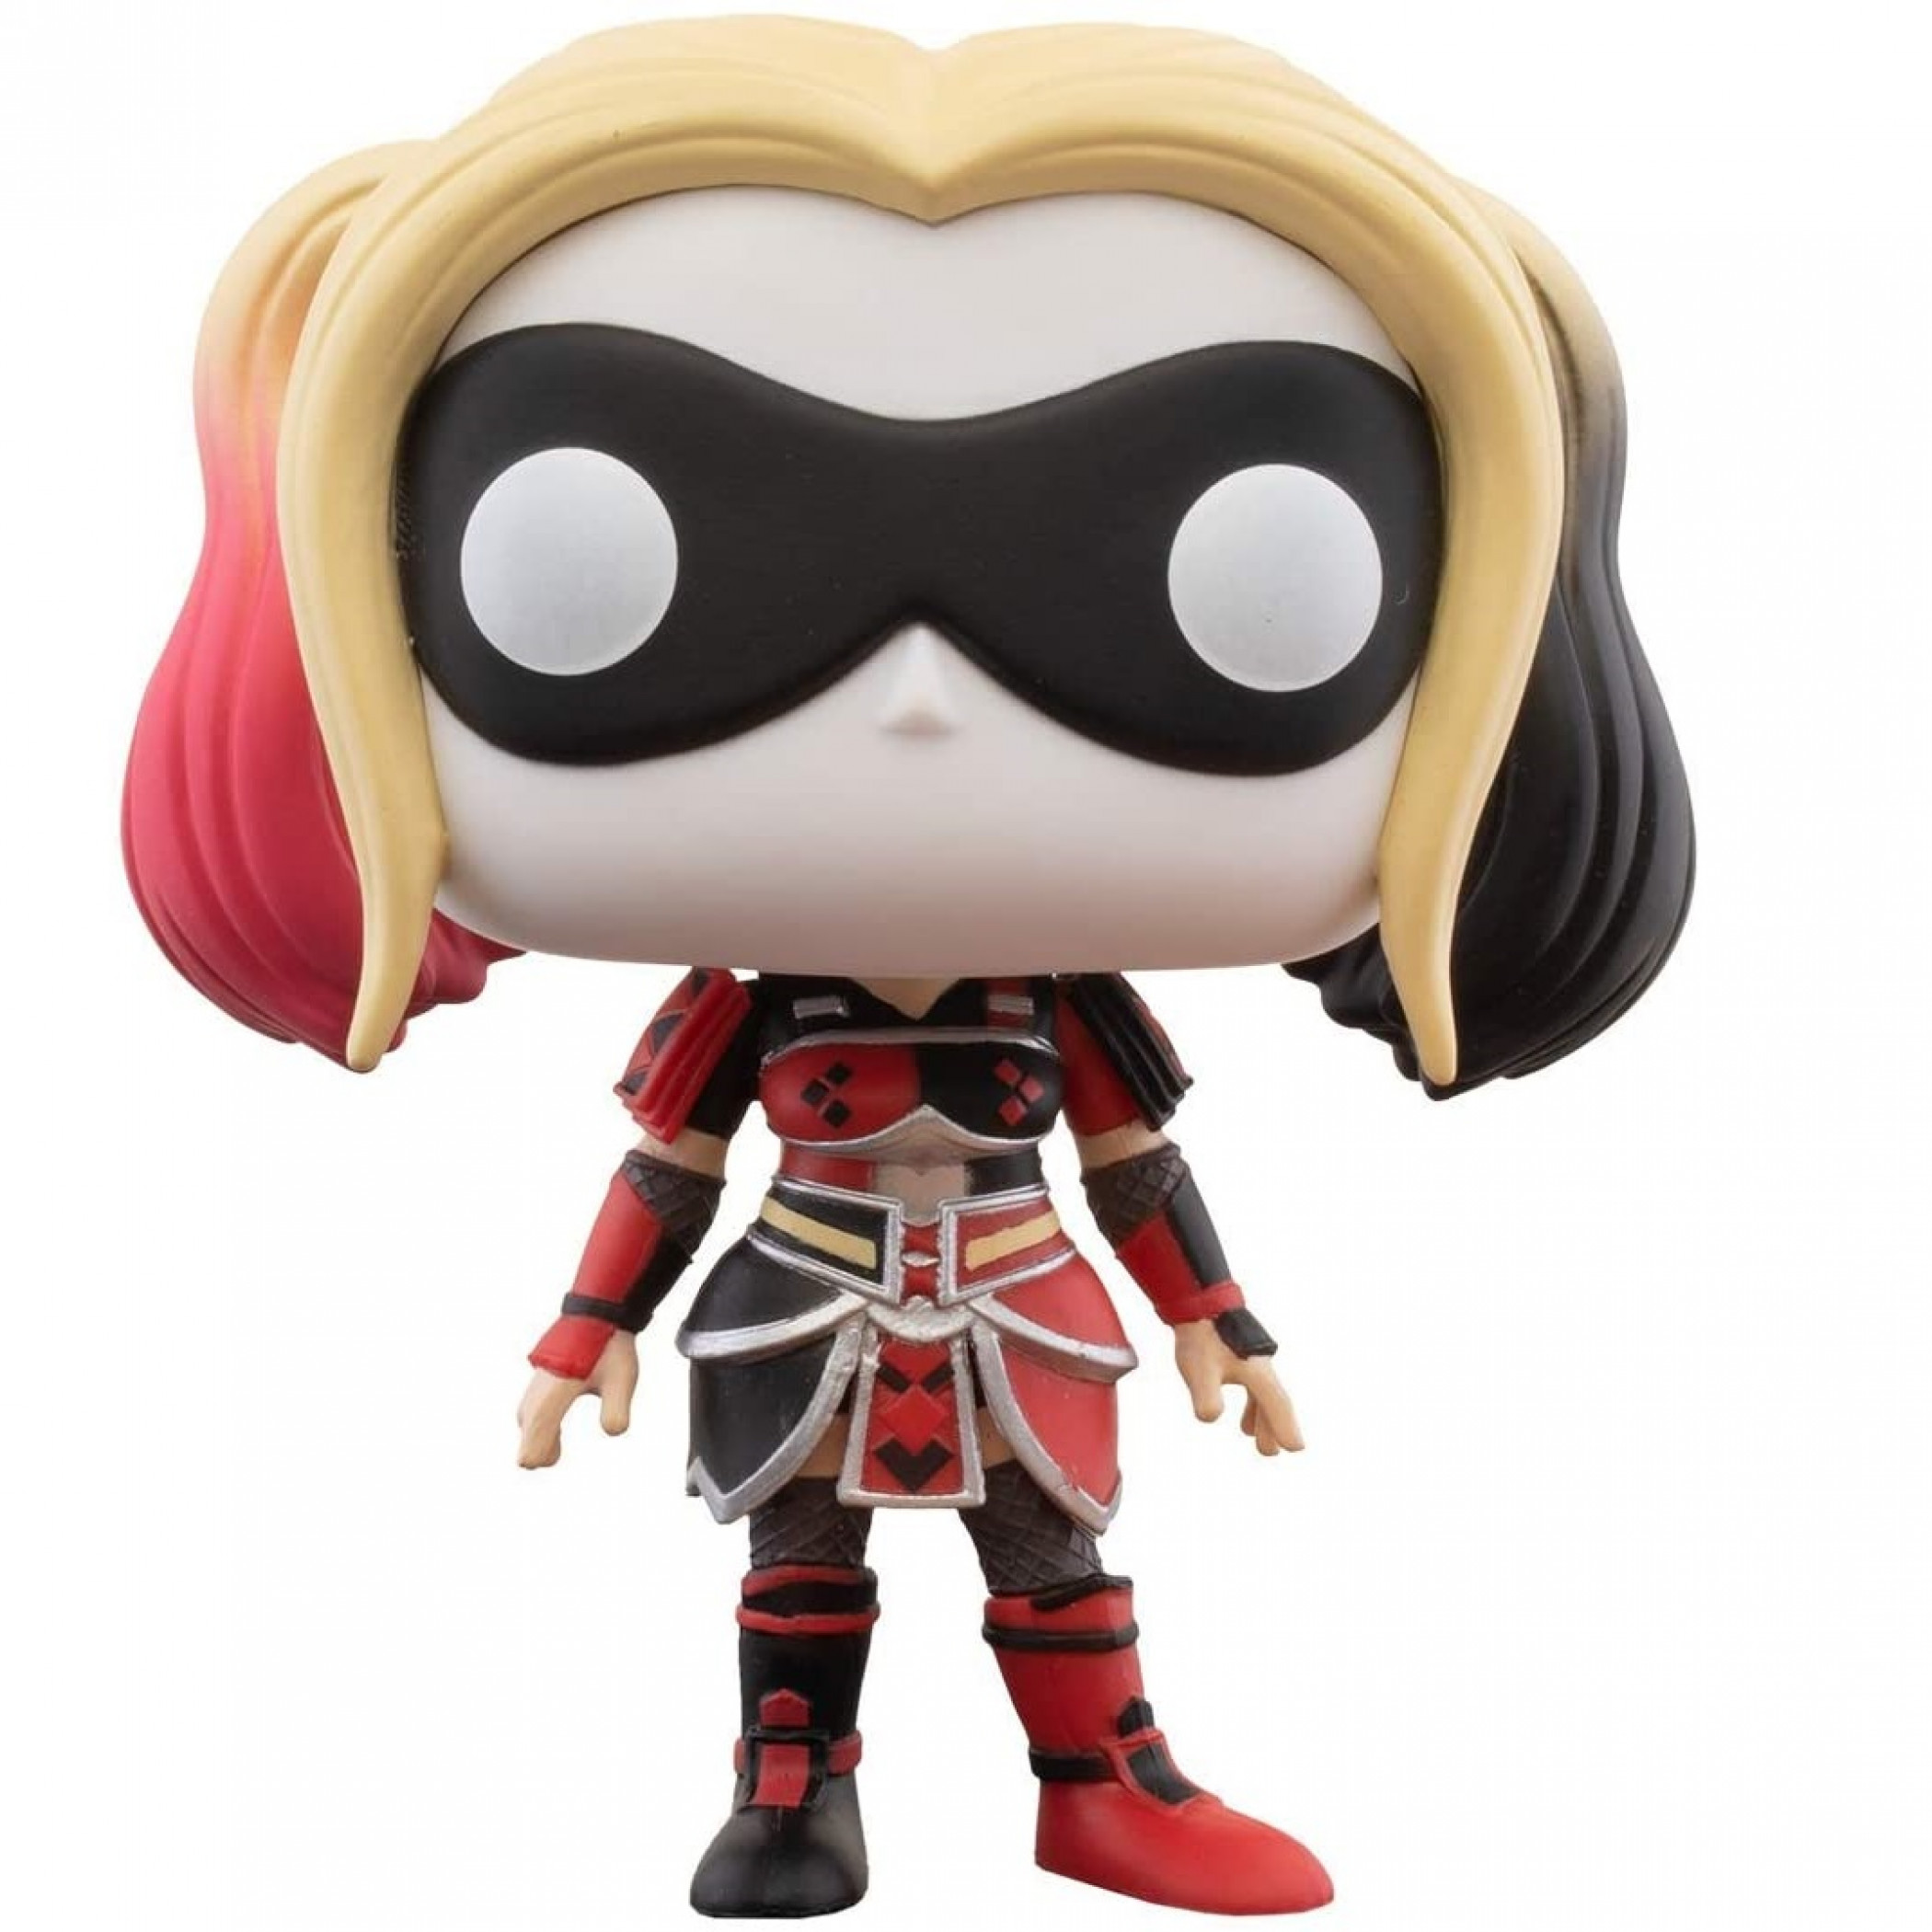 Harley Quinn Imperial Palace Funko Pop! Vinyl Figure with Chase